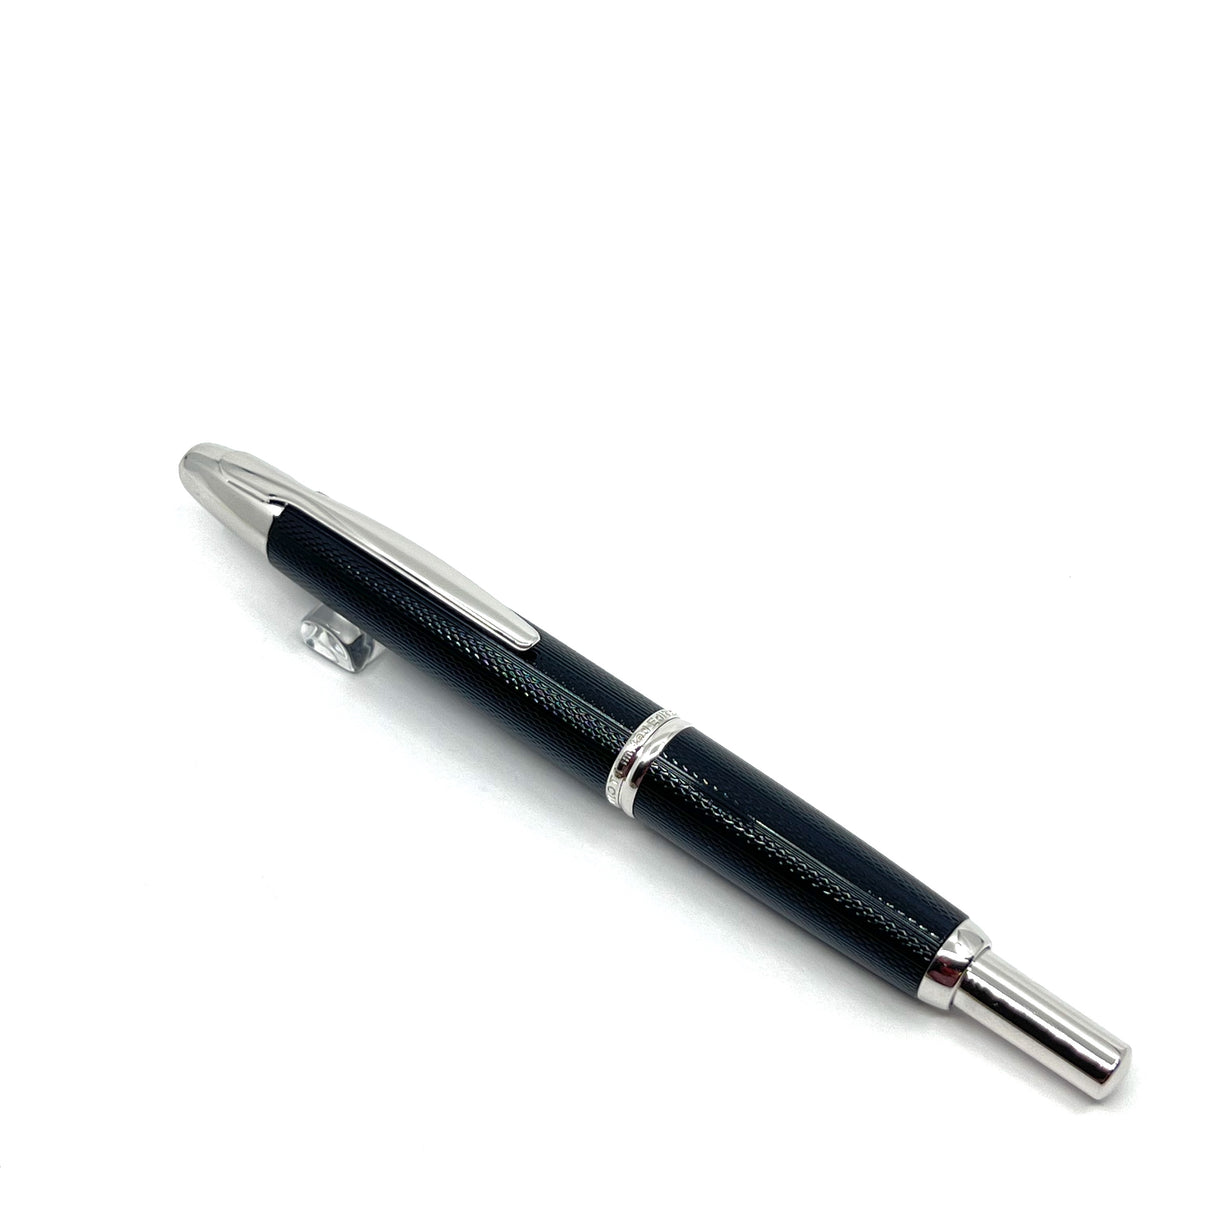 Pilot Vanishing Point 2016 Black Guilloche Limited Edition Fountain Pen